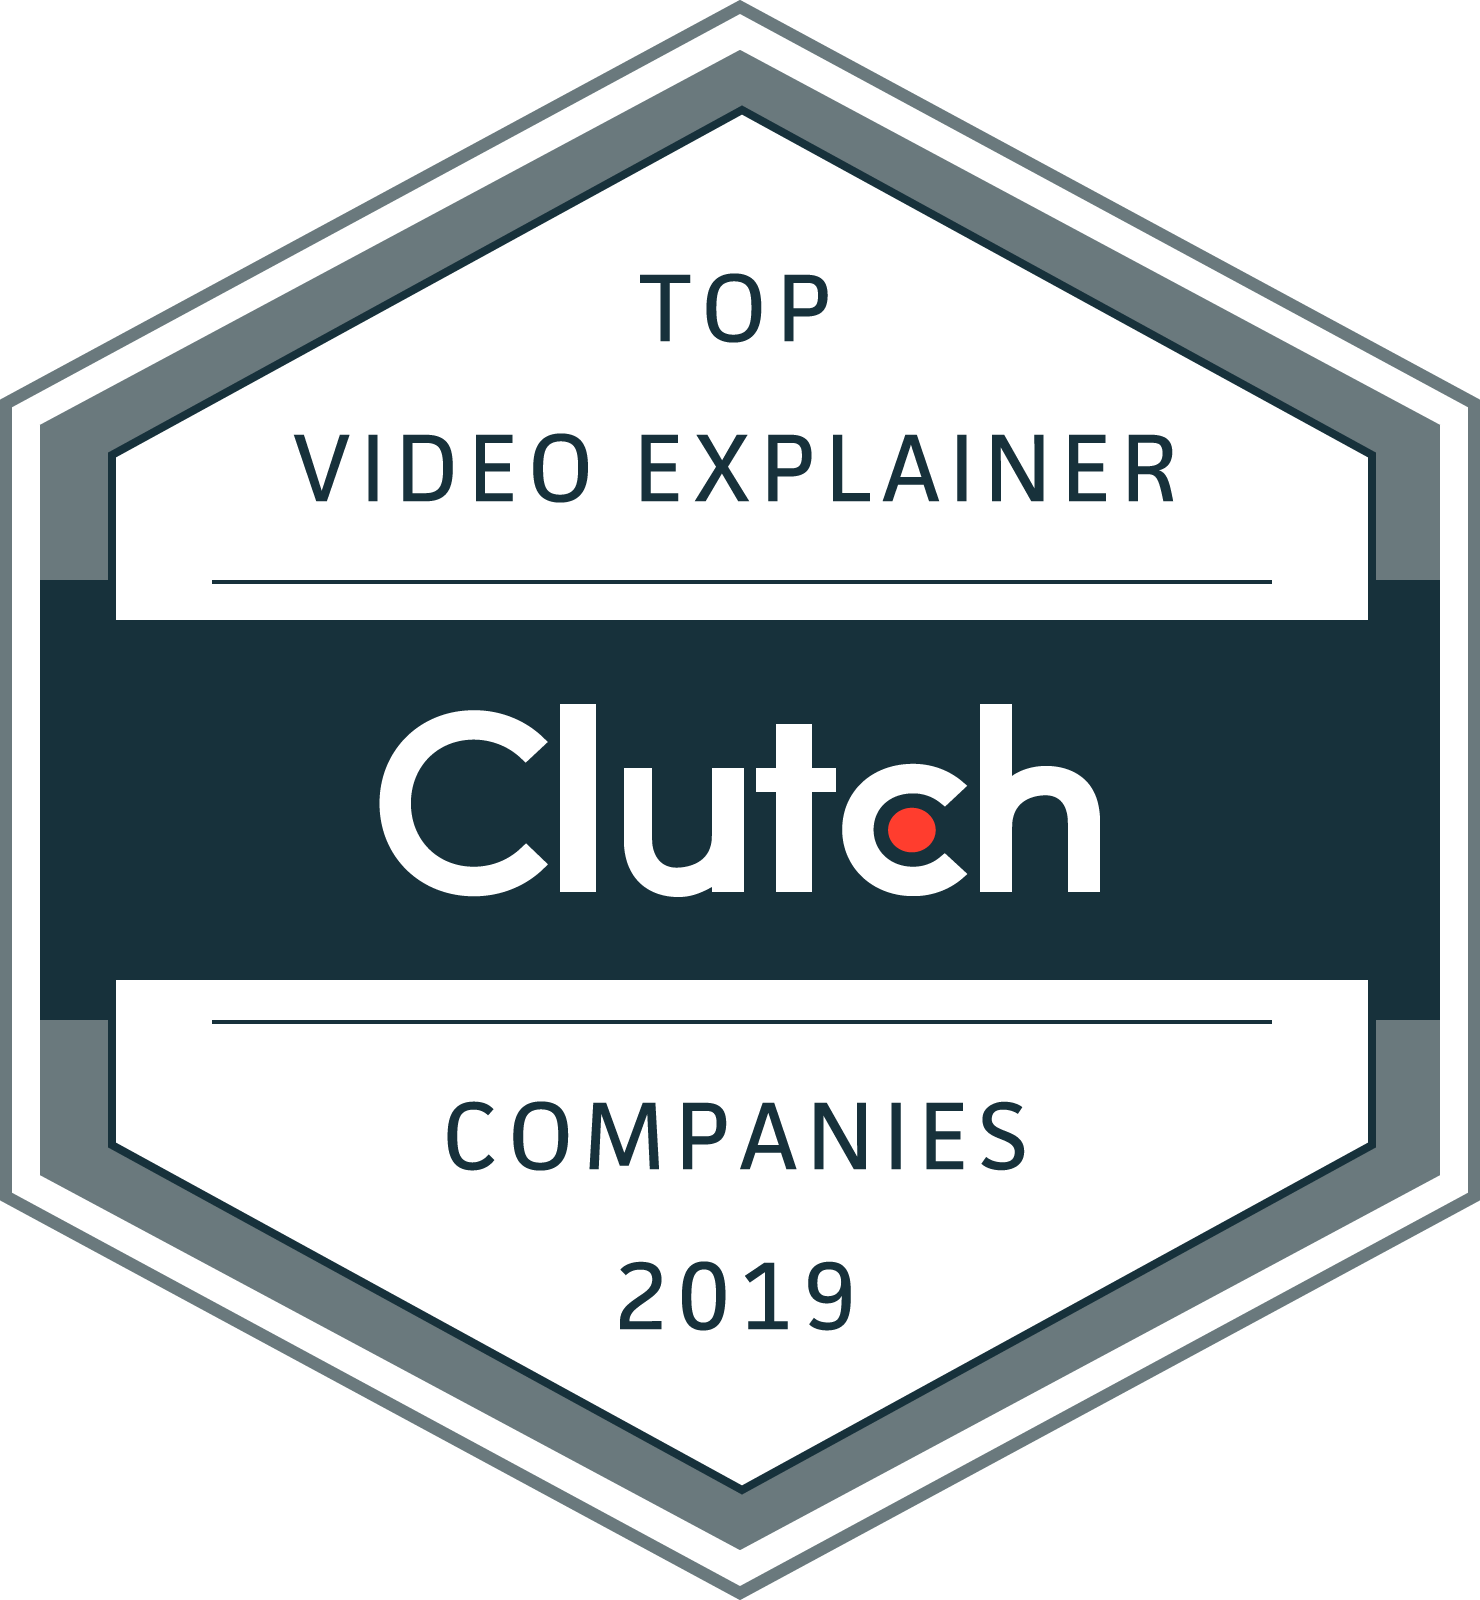 Top video explainer company on Clutch  - №1